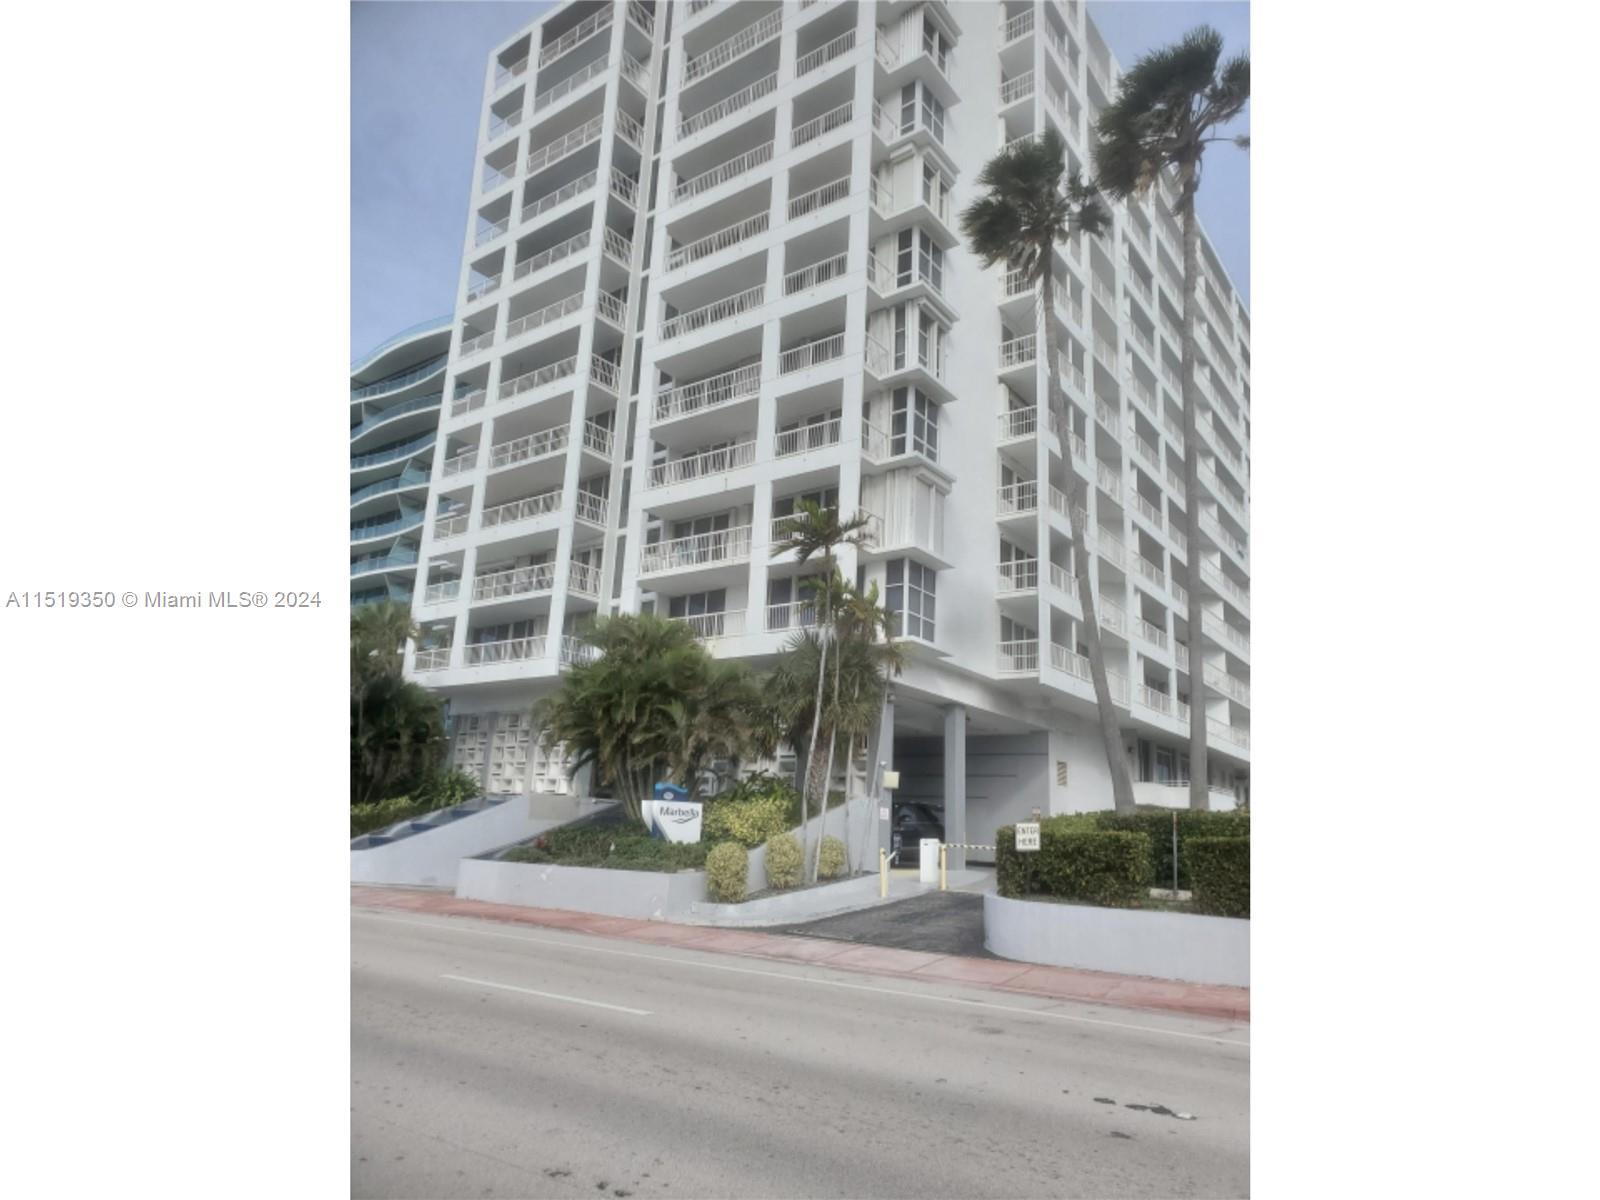 Photo of 9341 Collins Ave #202 in Surfside, FL